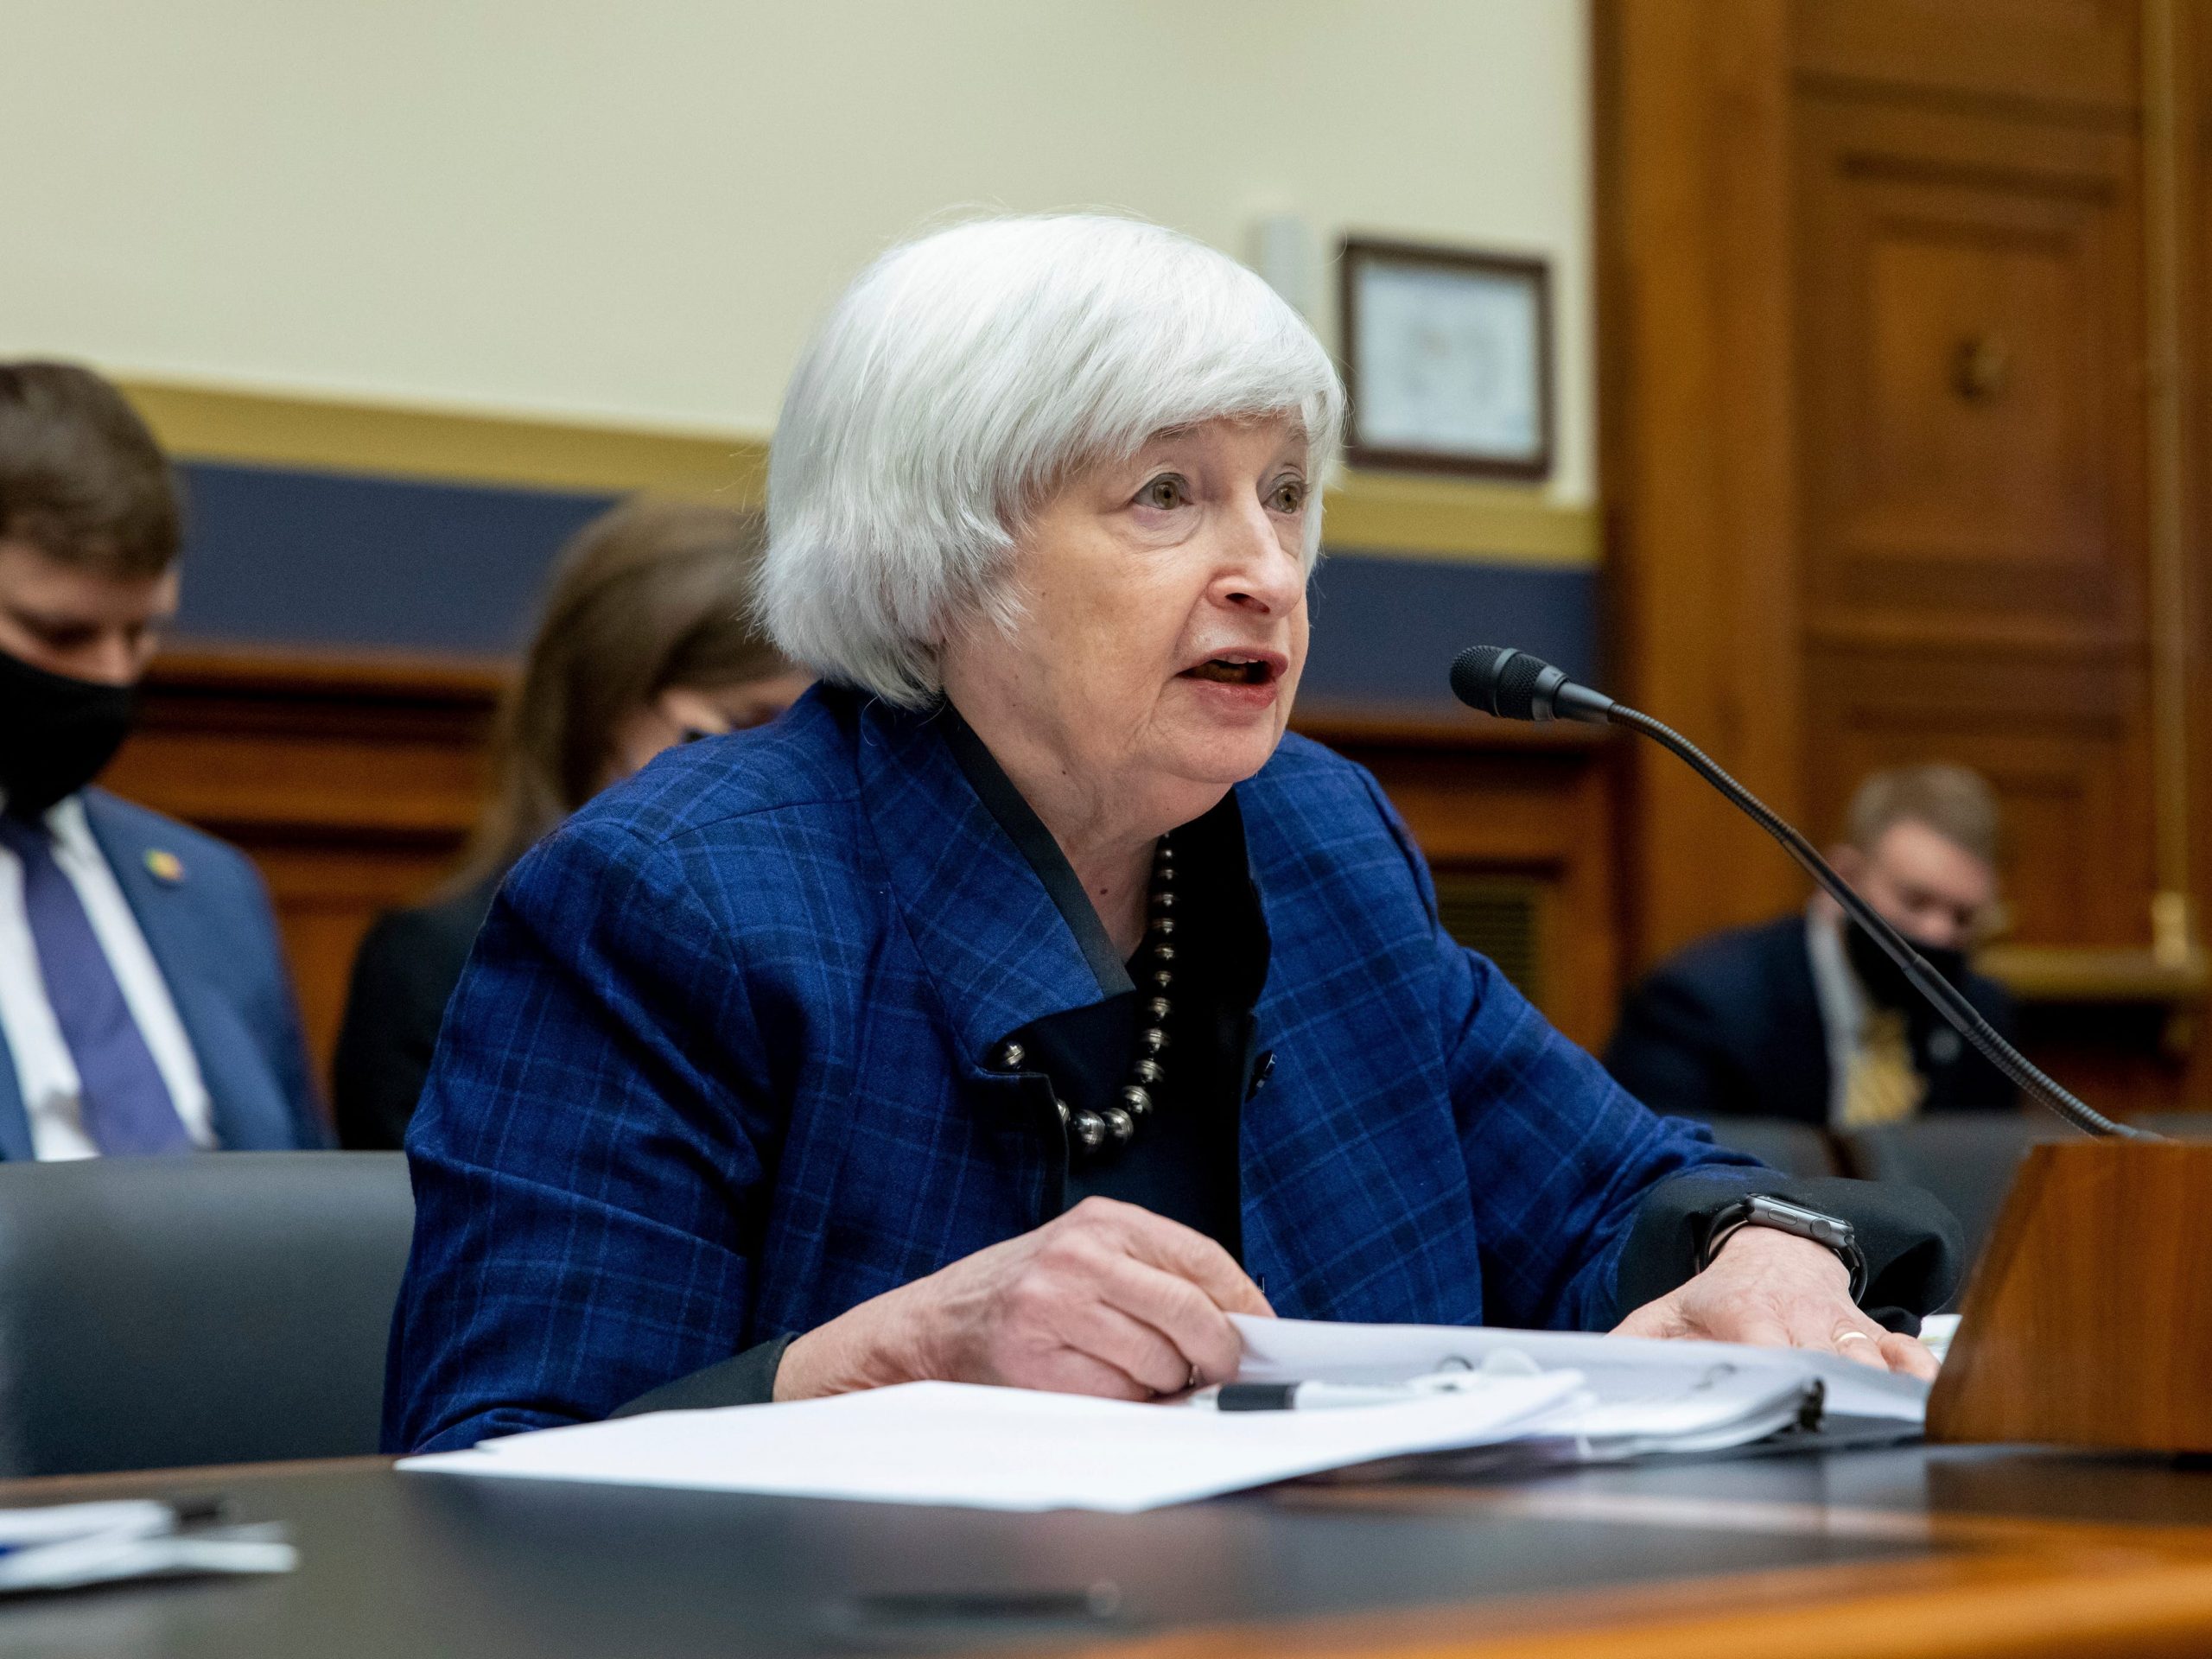 Janet Yellen speaks at a House committee hearing.